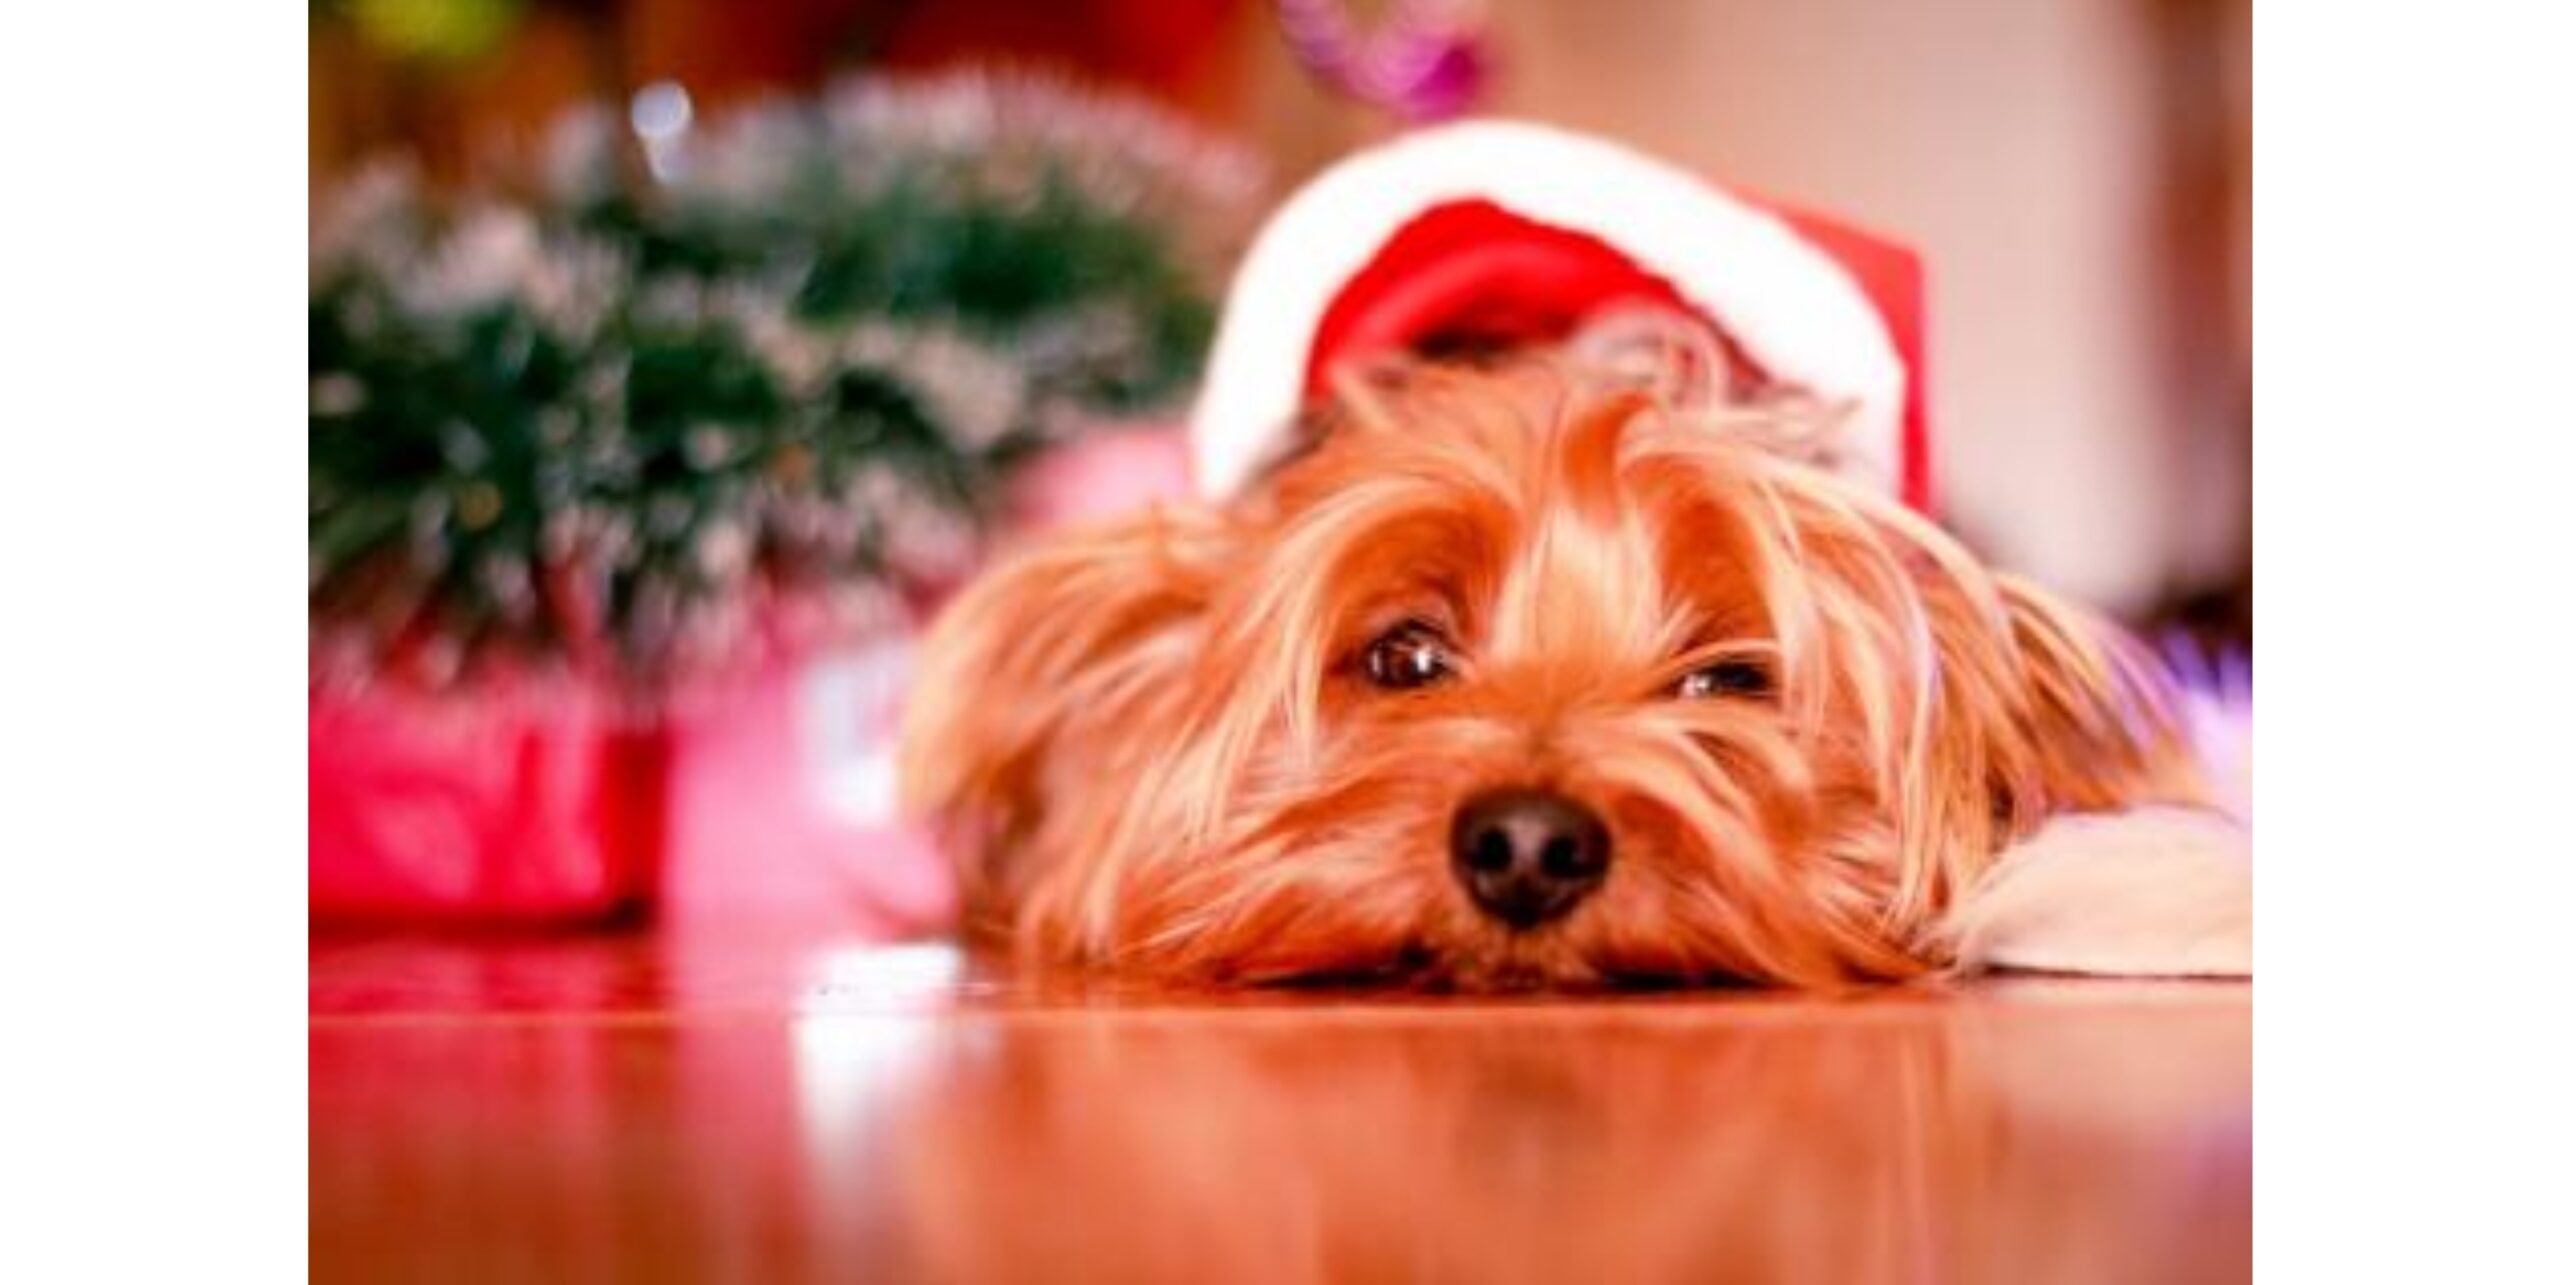 “Adopt don’t shop” for a pet this Christmas